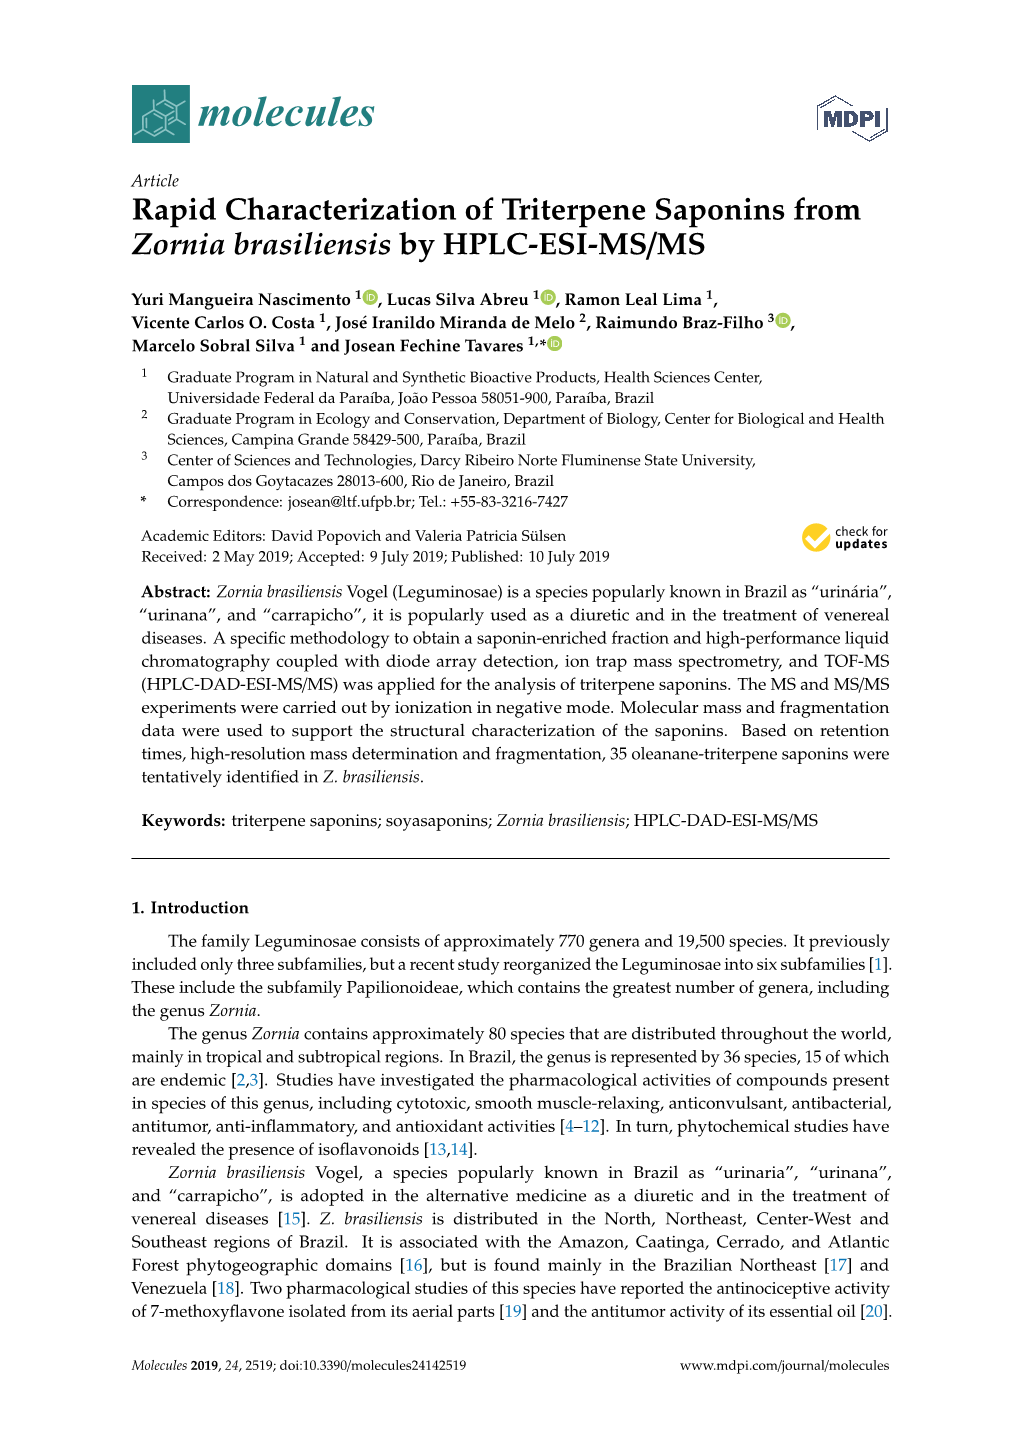 Rapid Characterization of Triterpene Saponins from Zornia Brasiliensis by HPLC-ESI-MS/MS